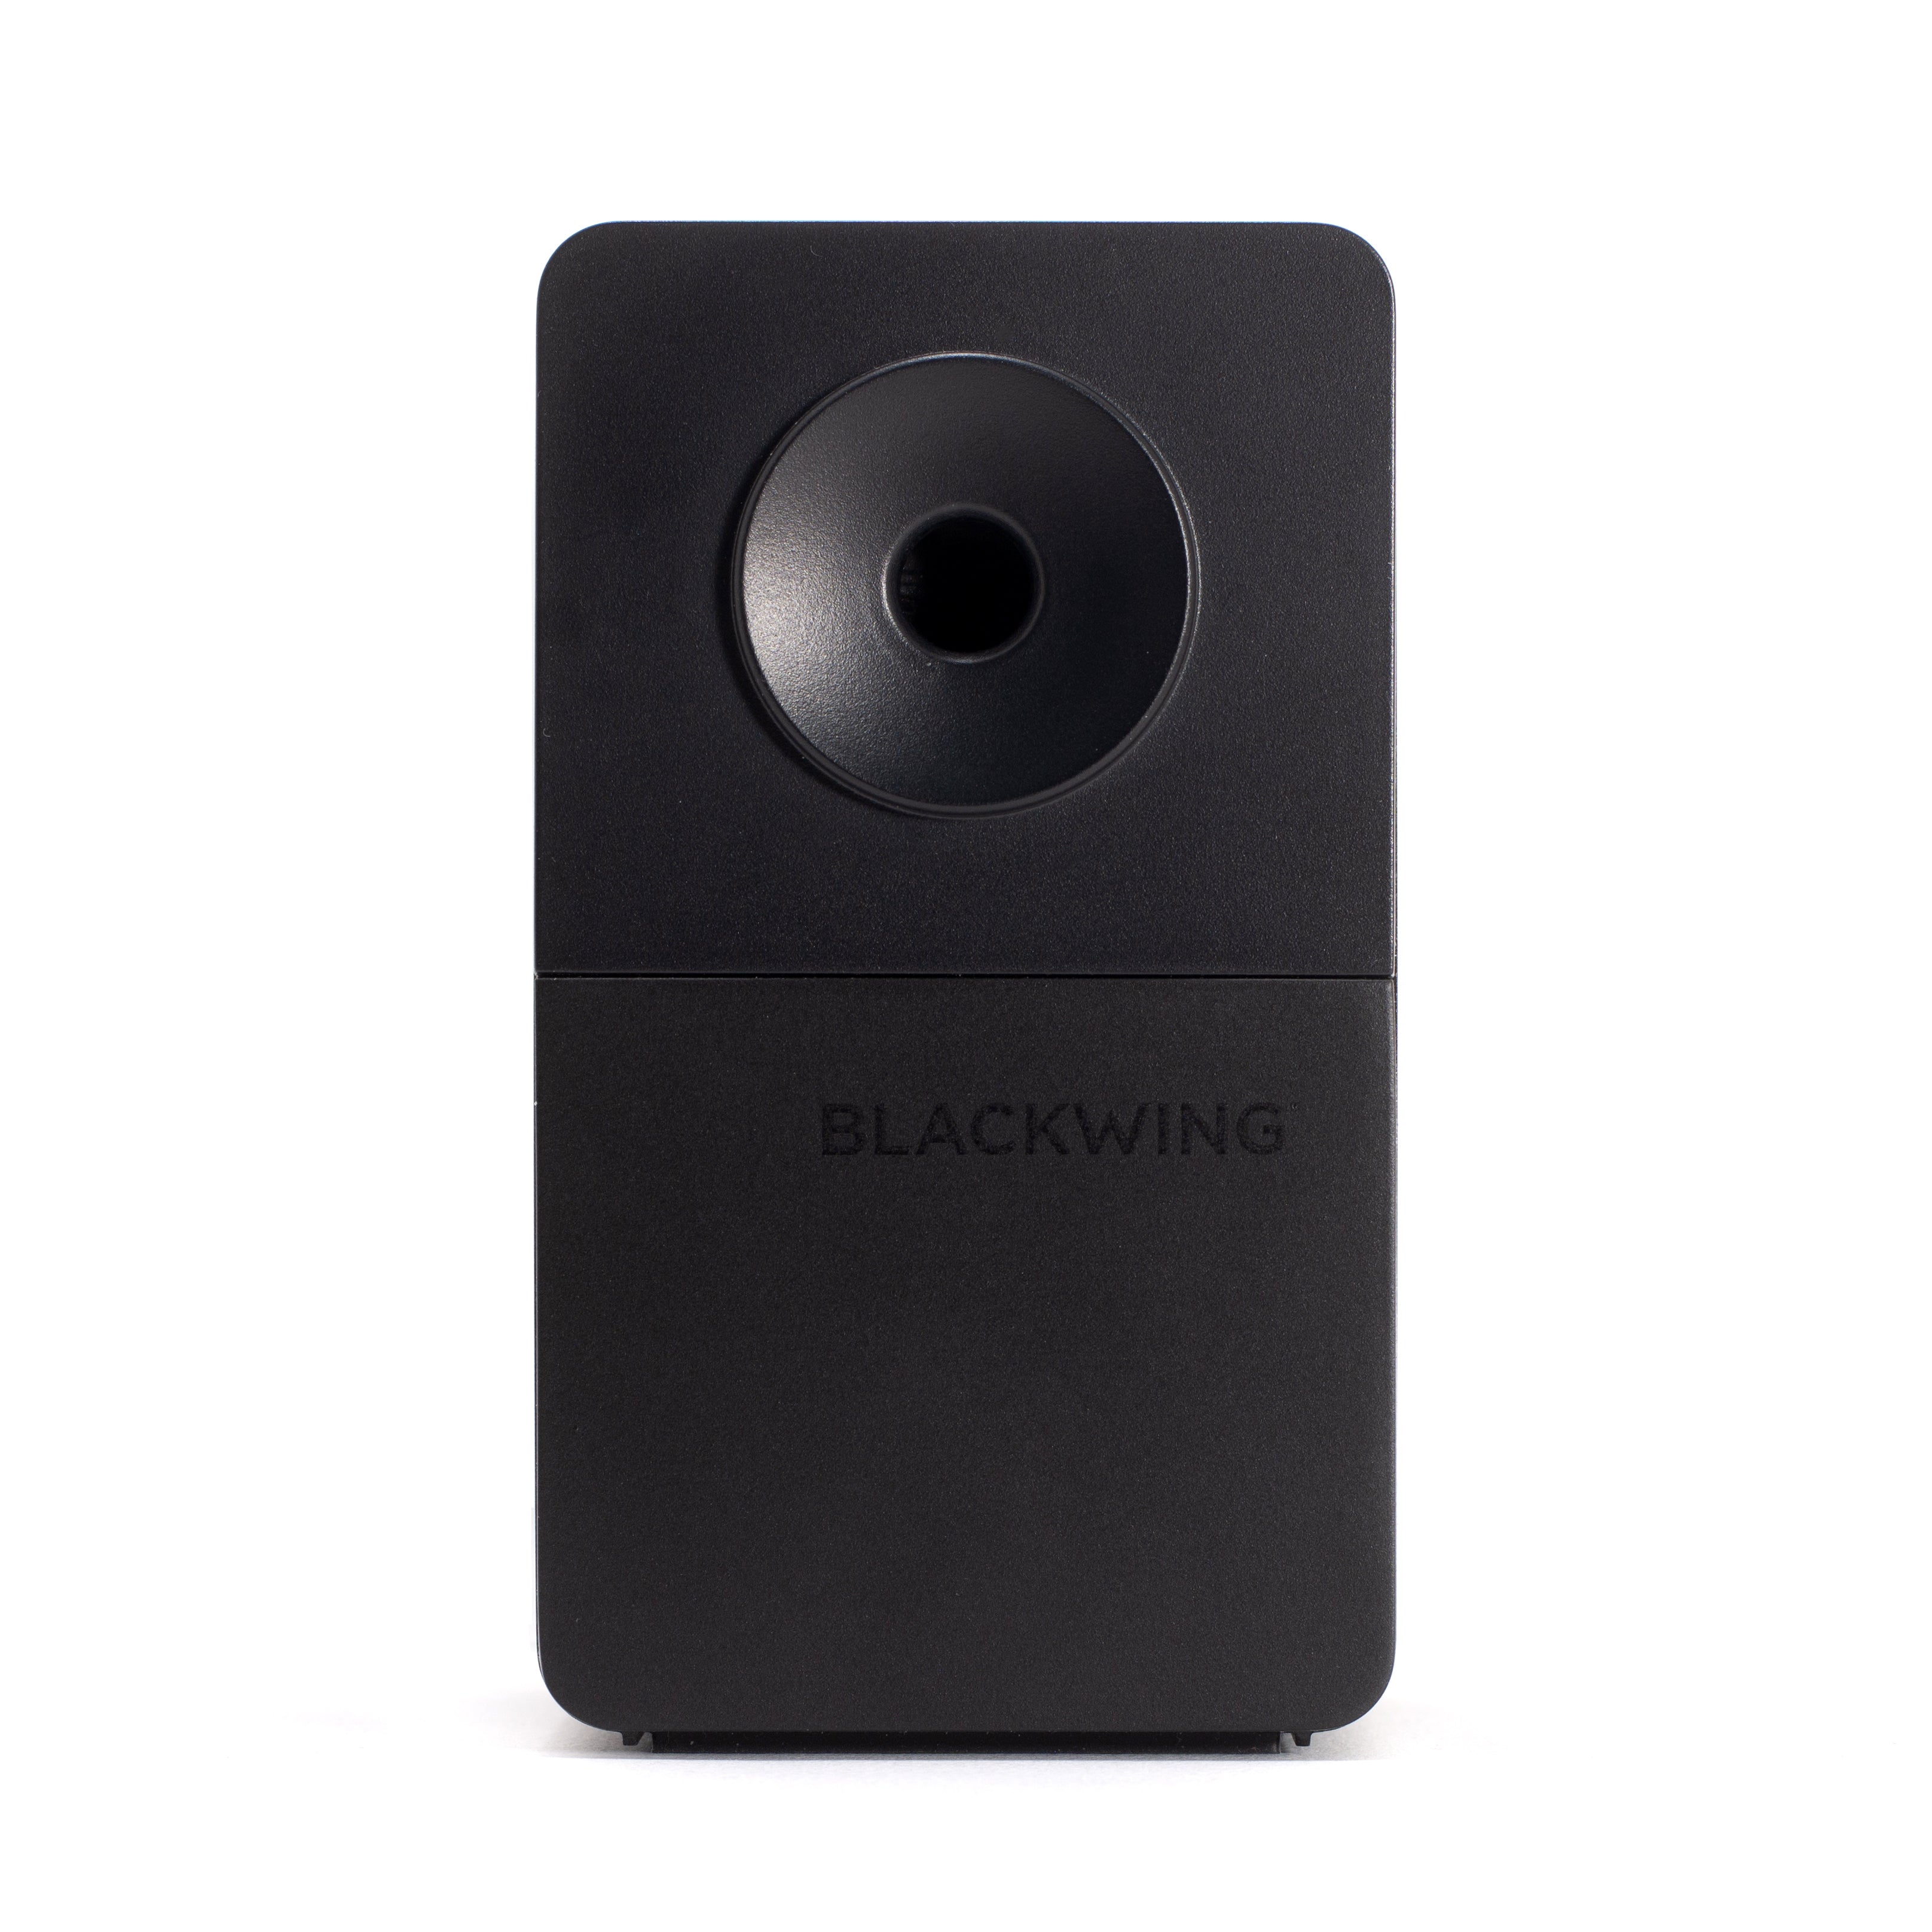 A Blackwing Desktop Sharpener with a round hole.